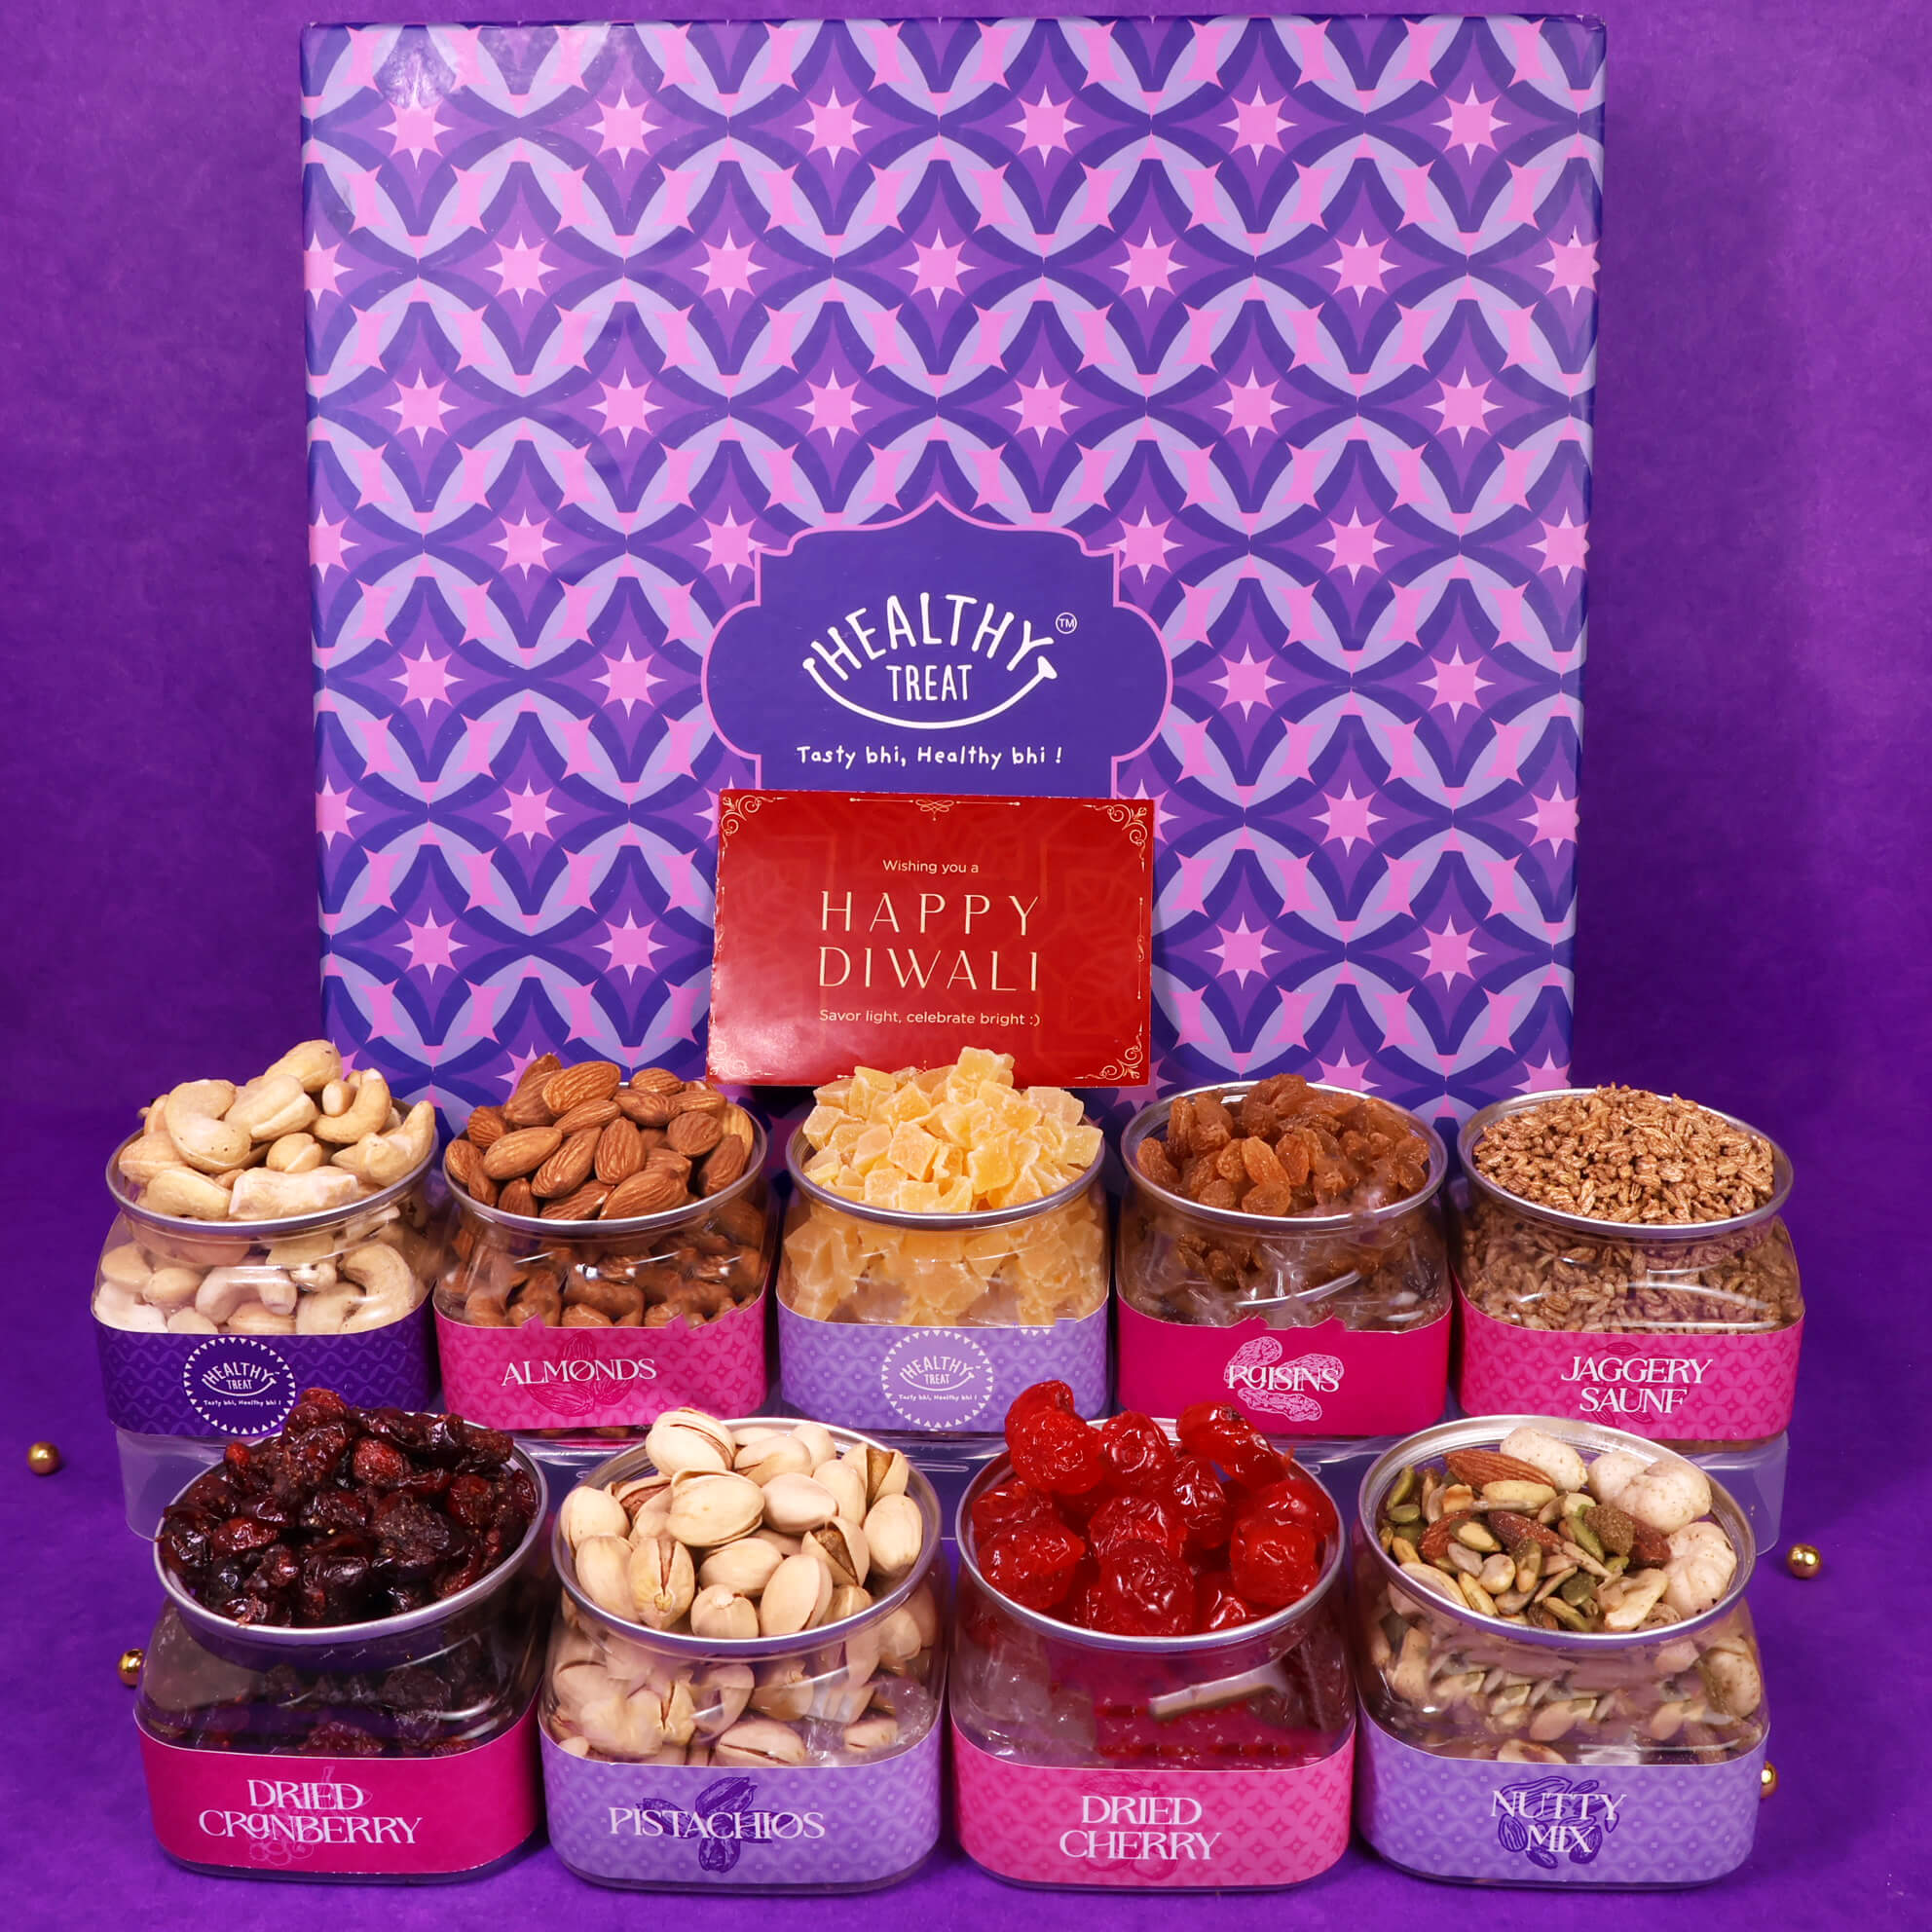 Dry Fruits Gift Box | Fruit gifts, Gifts, Diwali gifts